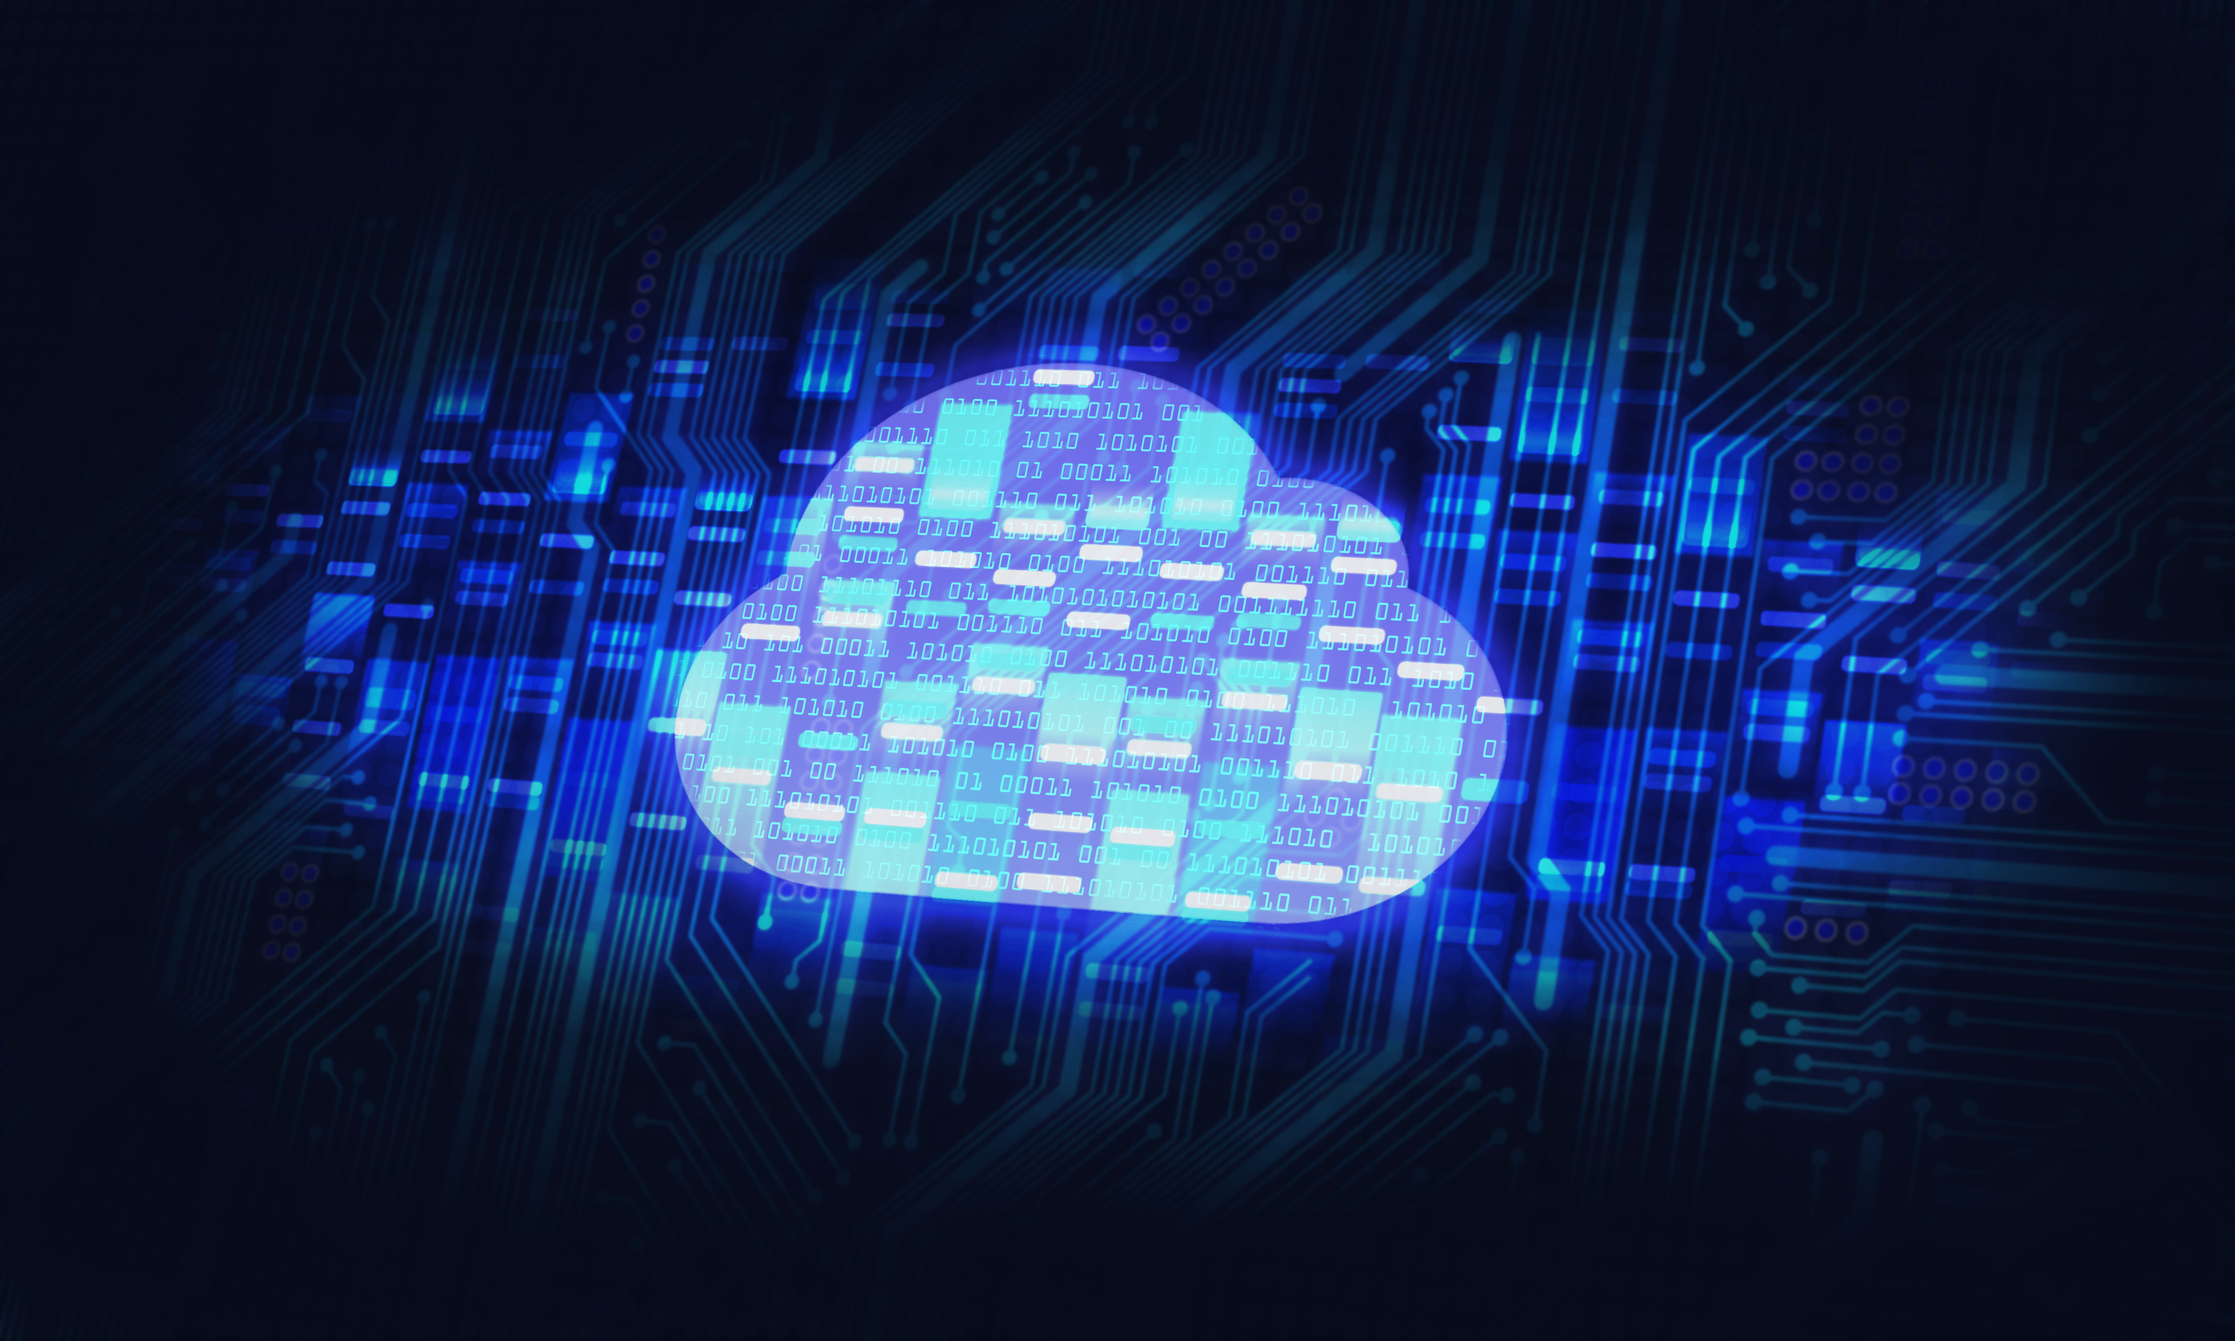 Colocation Providers: How Can You Embrace the Move to Hybrid Cloud?